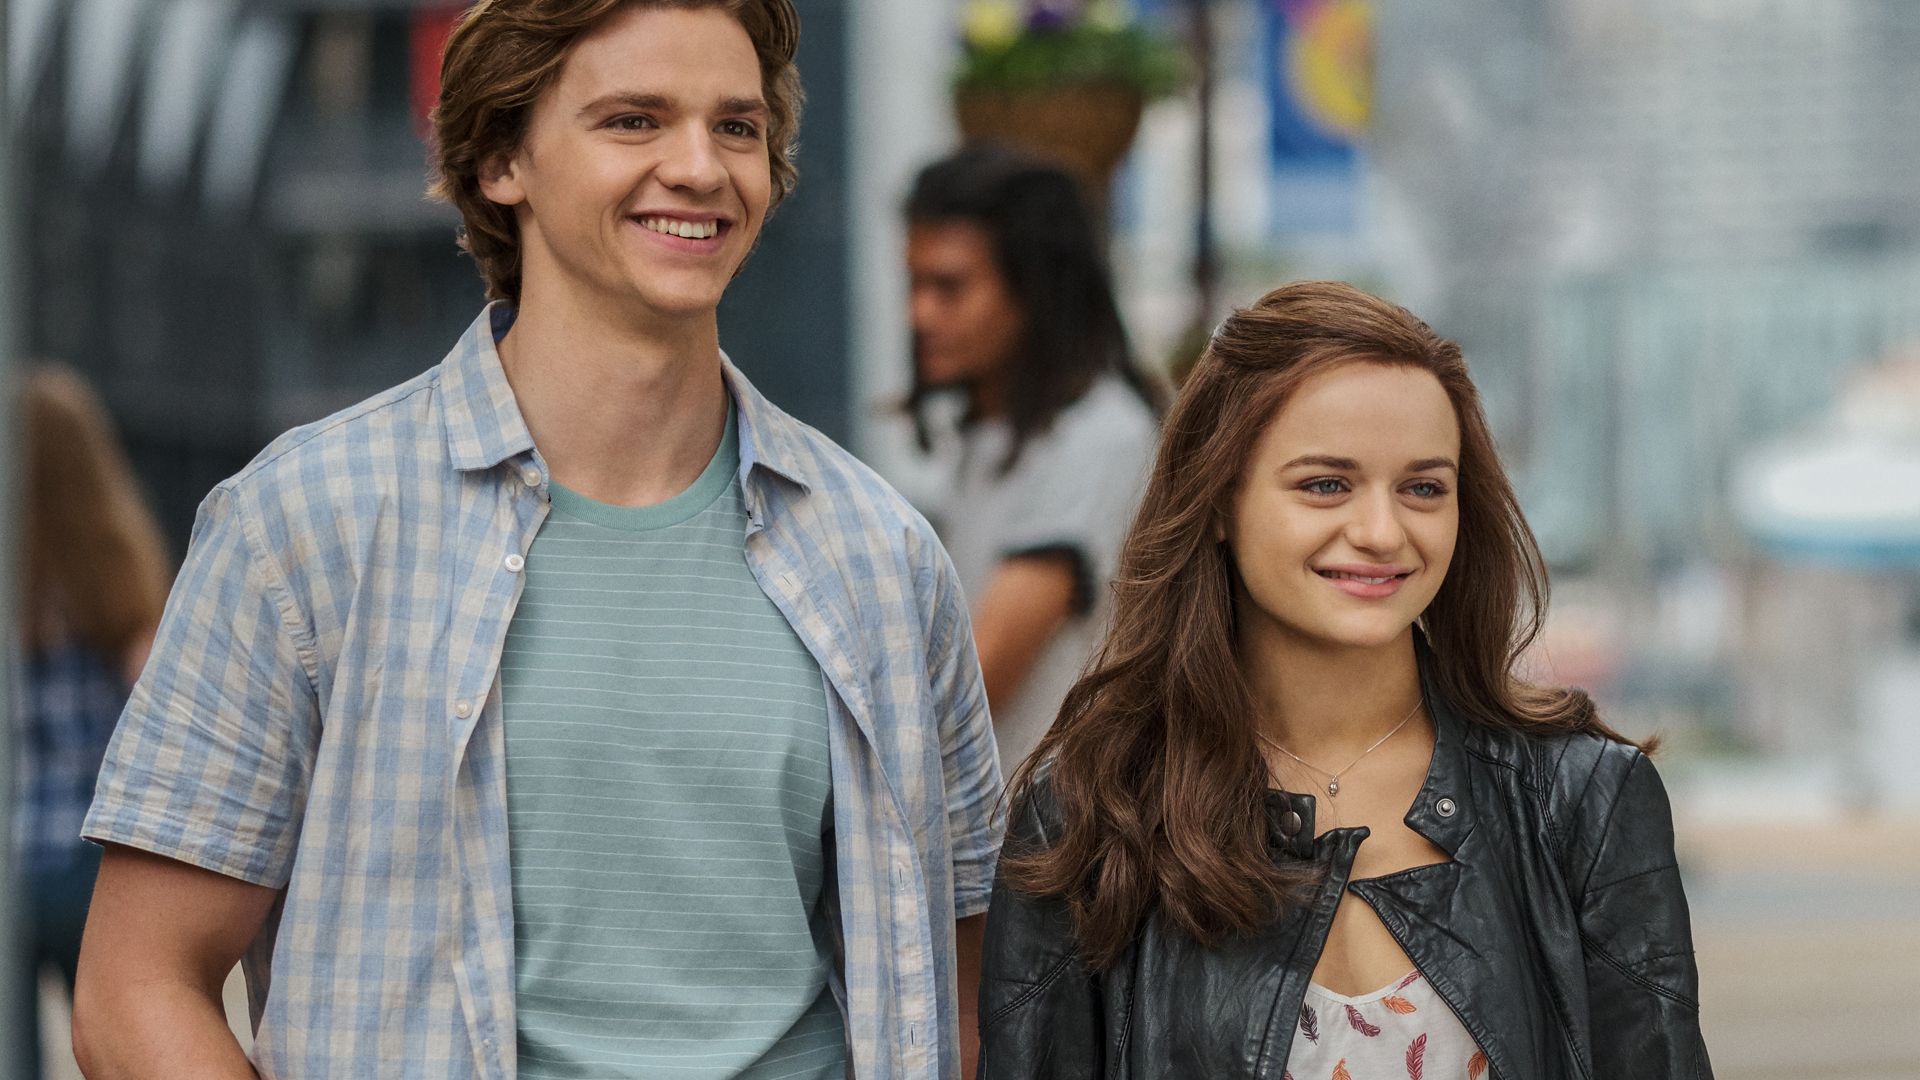 What Time Will 'The Kissing Booth 2' Be Released on Netflix?